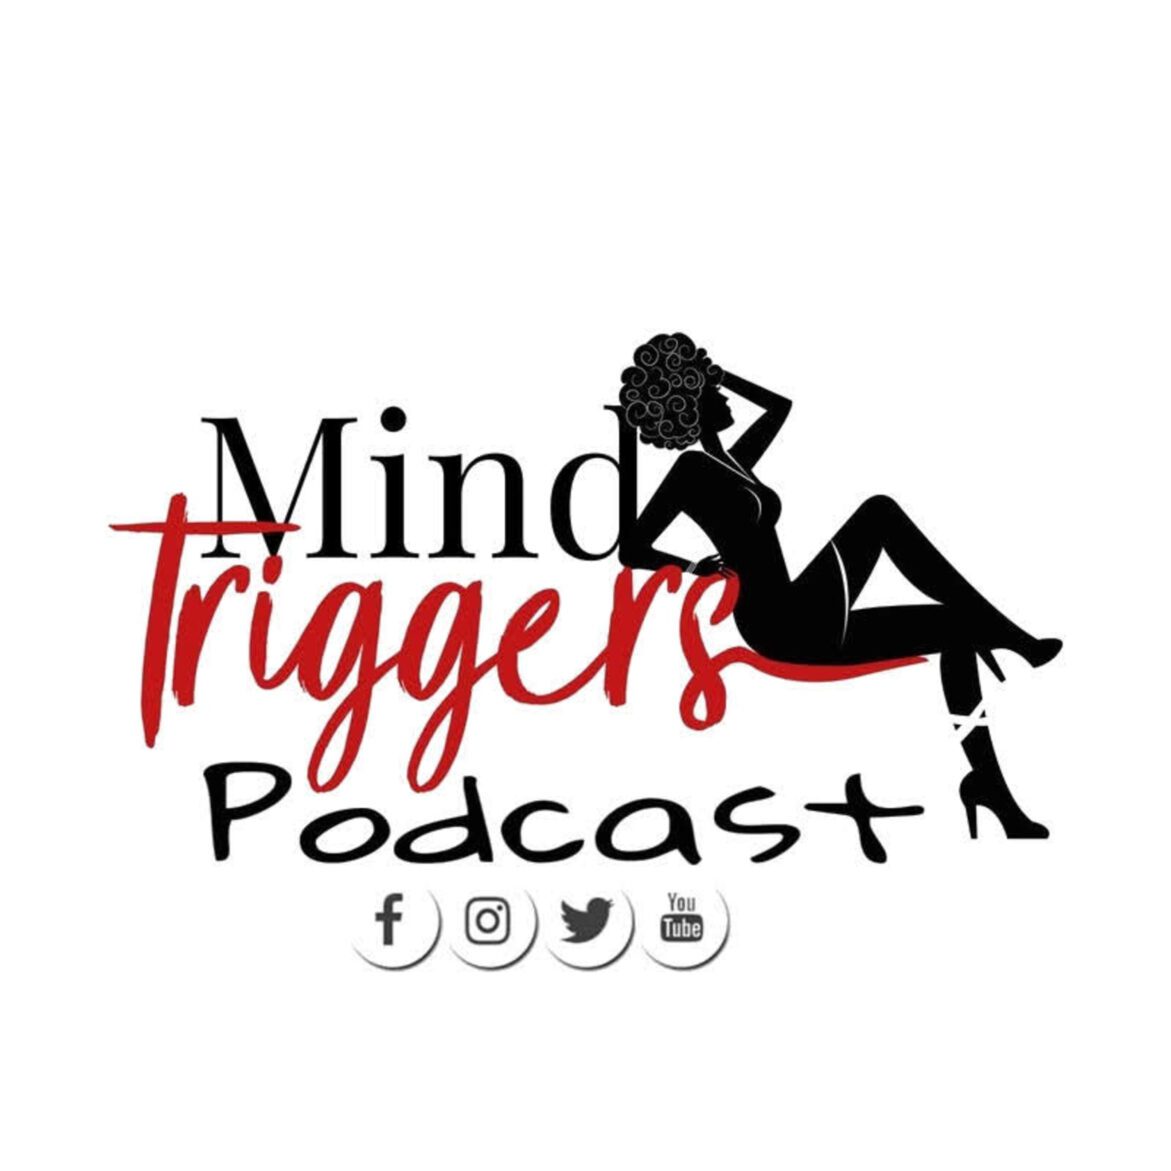 Black Podcasting - S2: Ep. 12 Kitty Talk with Tiierraable T